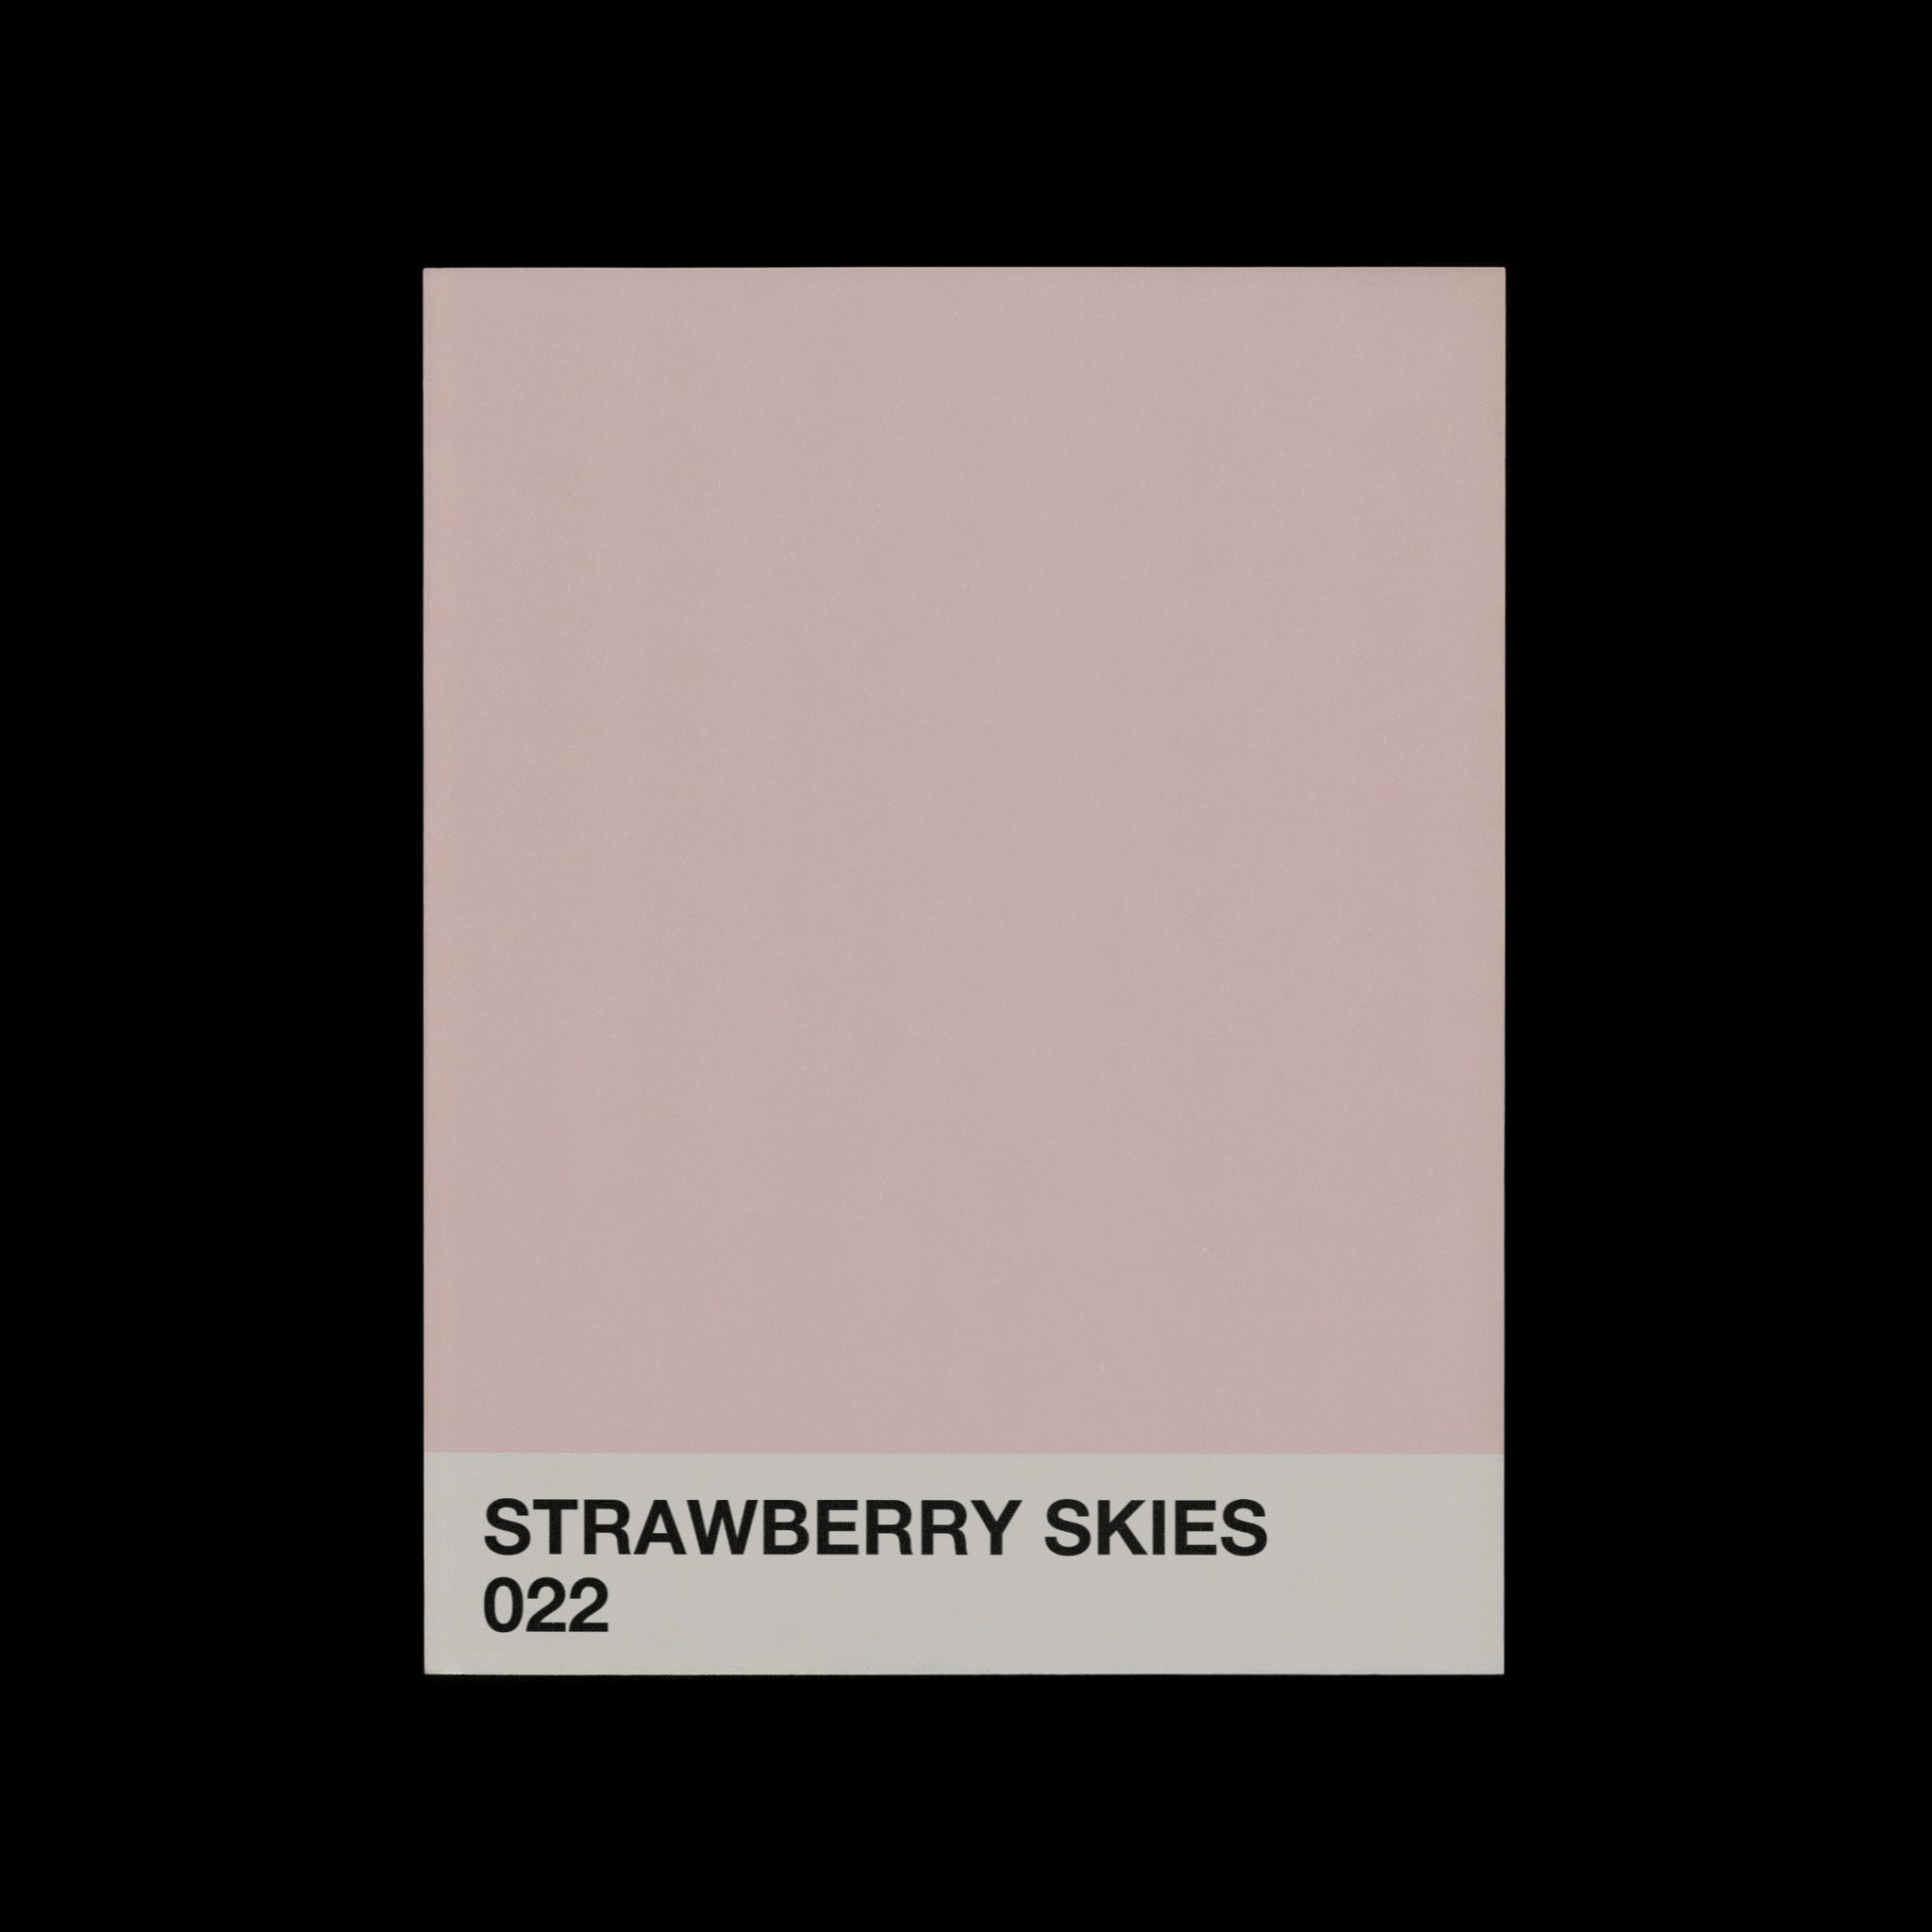 © les muses / Shades is a collection of color shade wall art prints perfect for a modern or minimalist gallery wall. The pastel color block posters have a minimal aesthetic and comes in an array of dreamy colors.